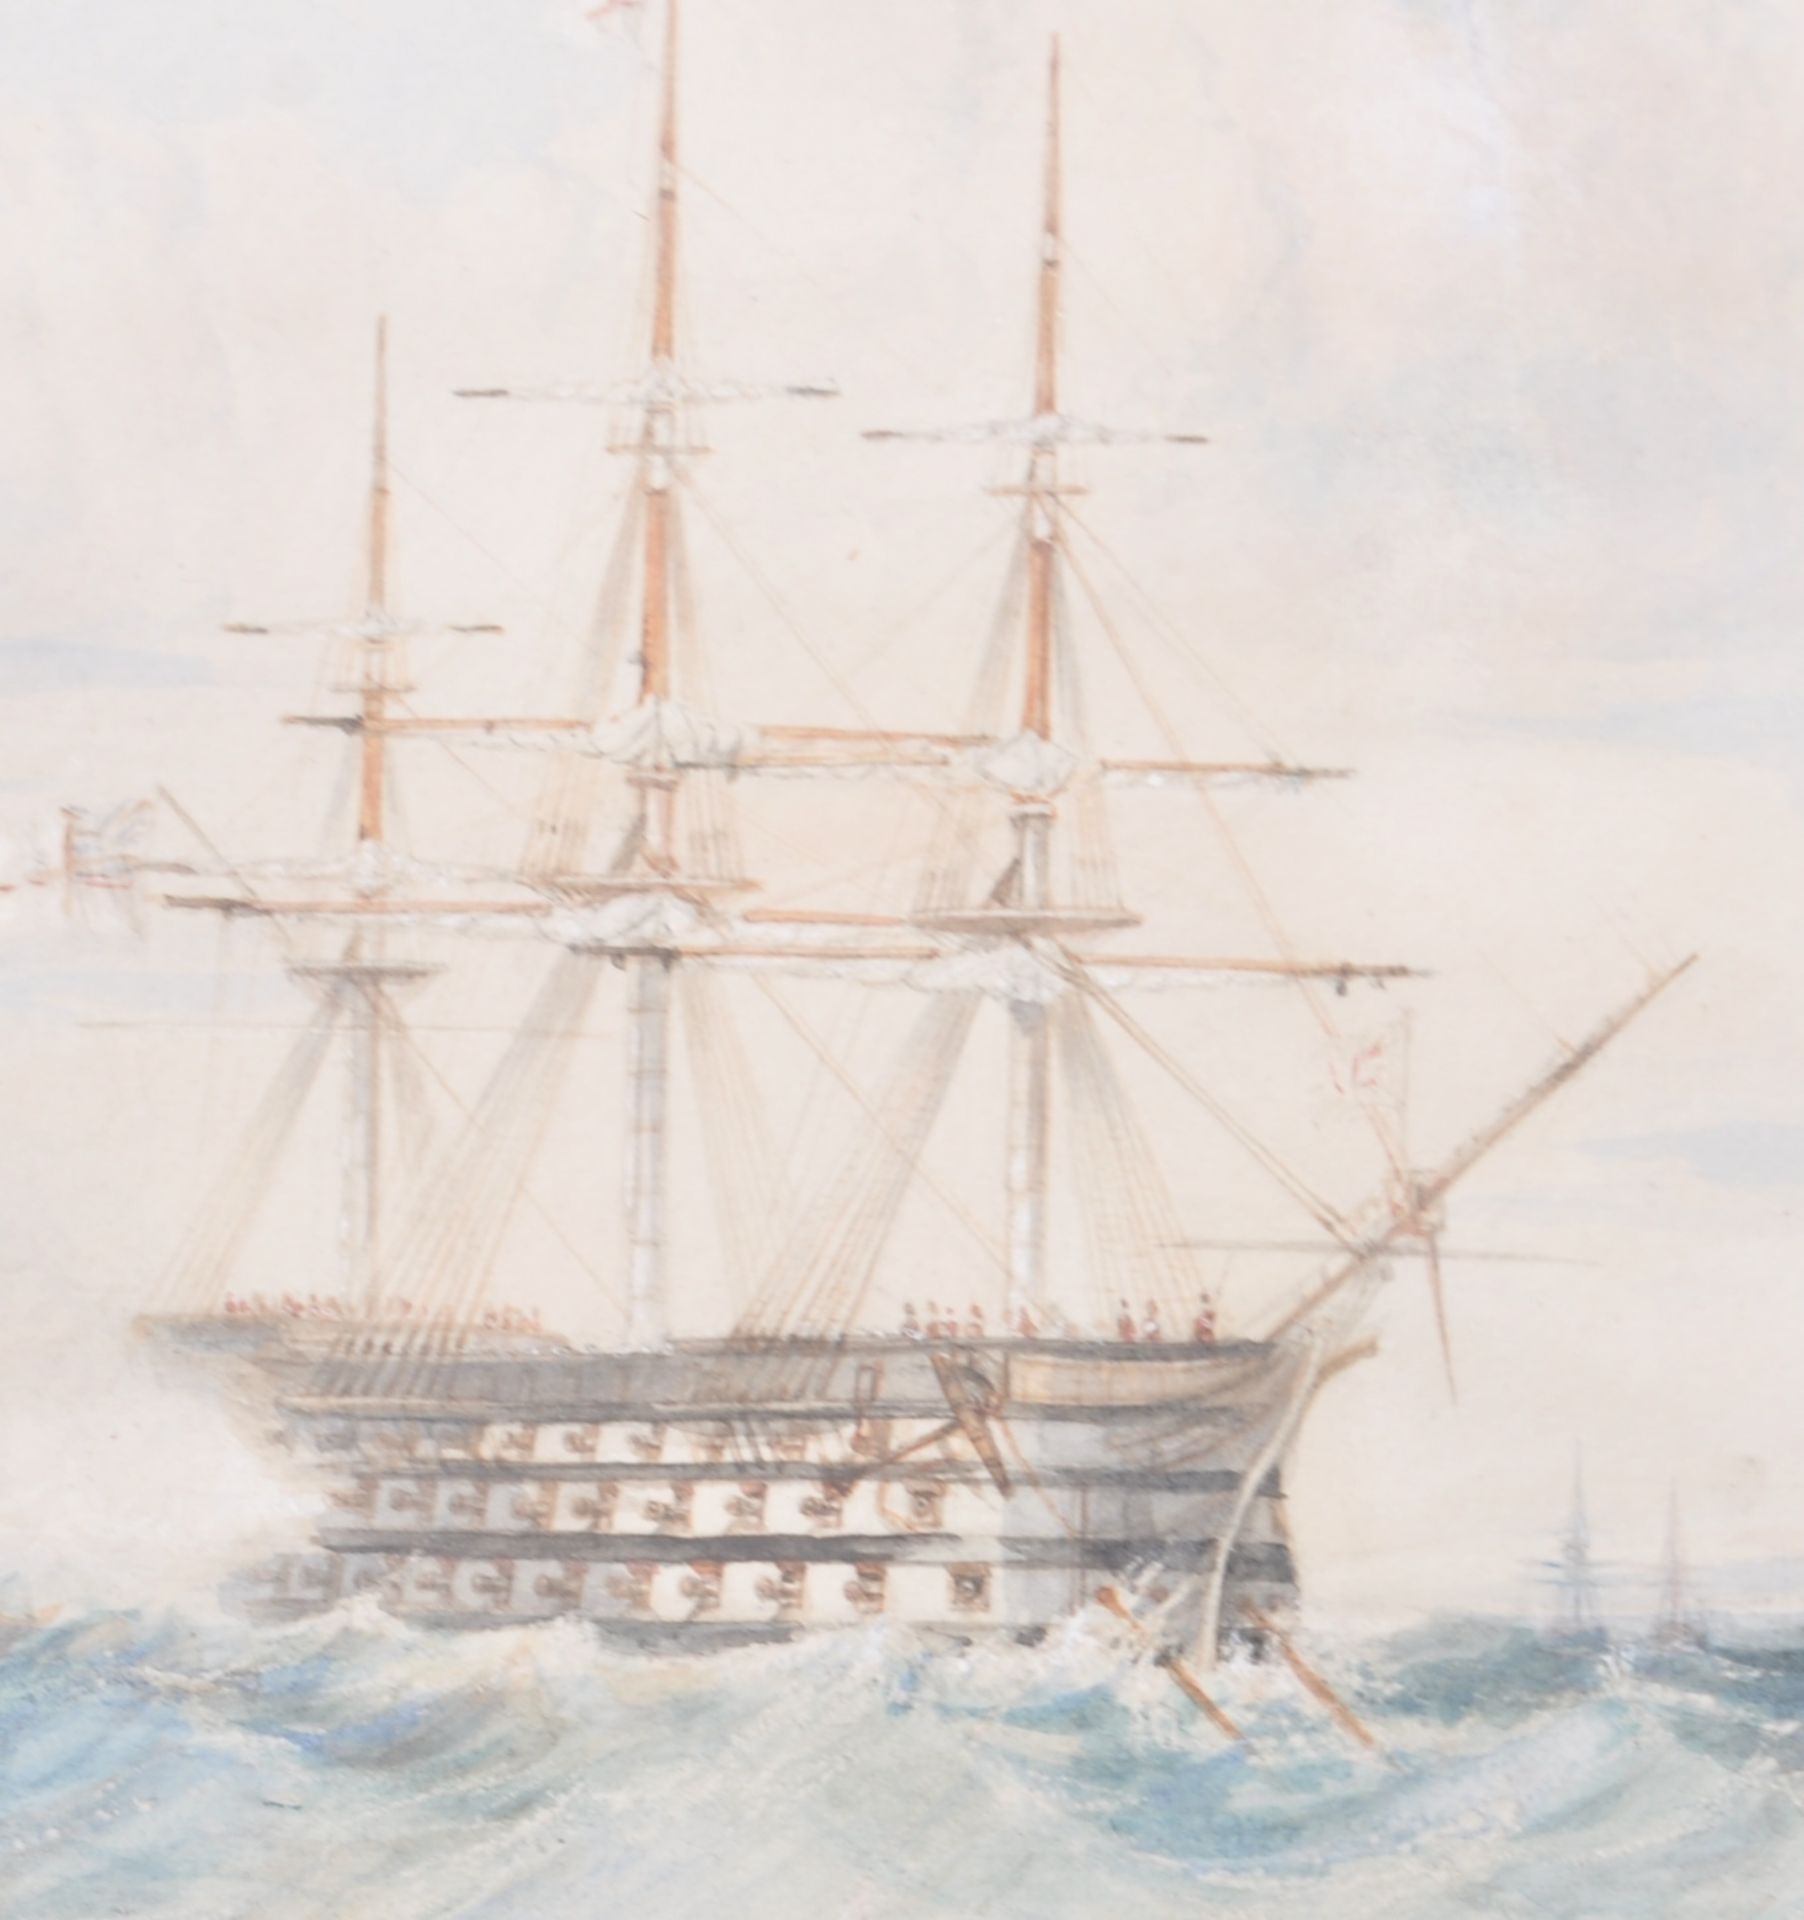 MID 19TH CENTURY VICTORIAN MARITIME WATERCOLOUR PAINTING - Image 3 of 7